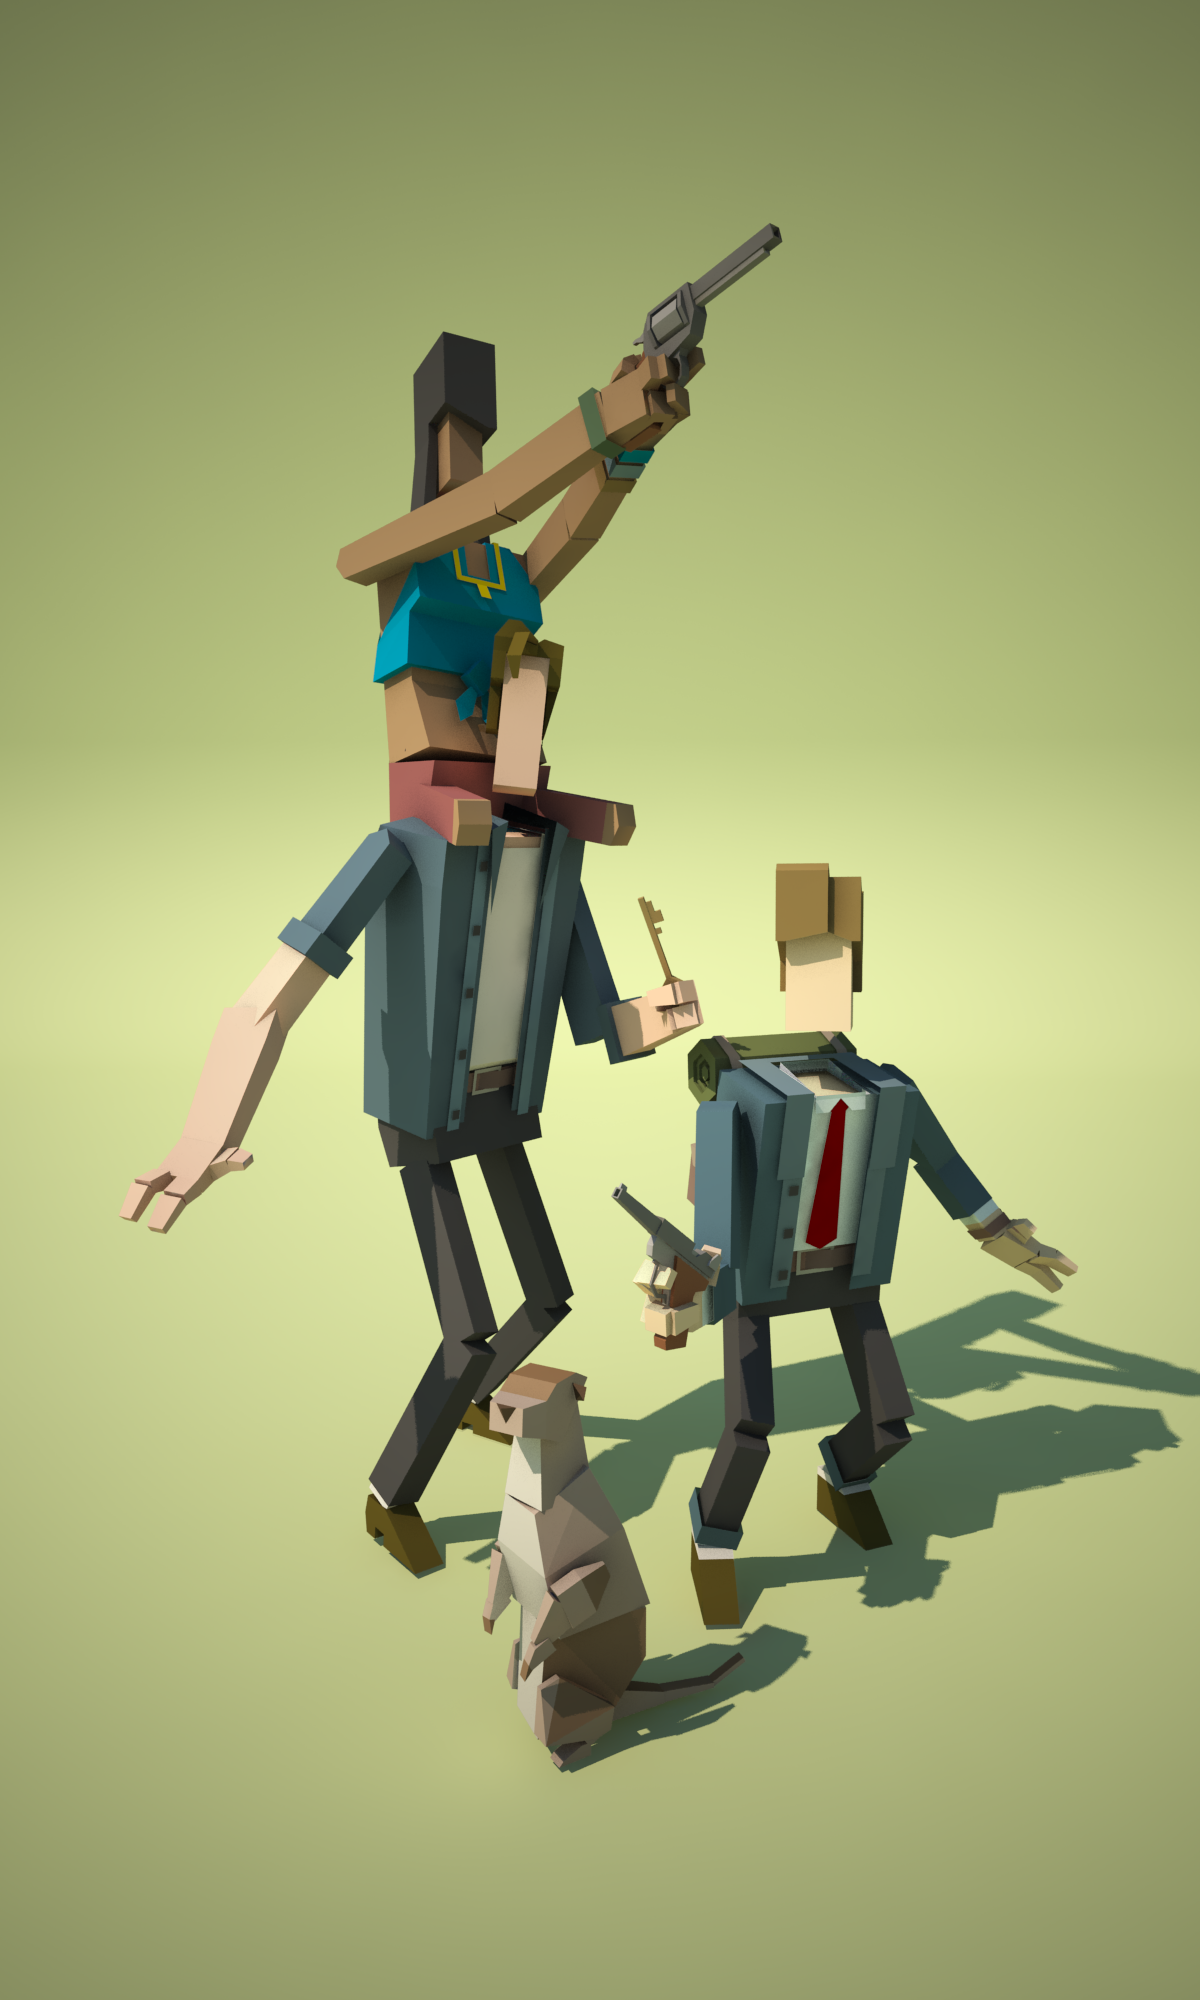 jake__eddie__susannah_and_oi_by_ehnoi-d4snqm1.png